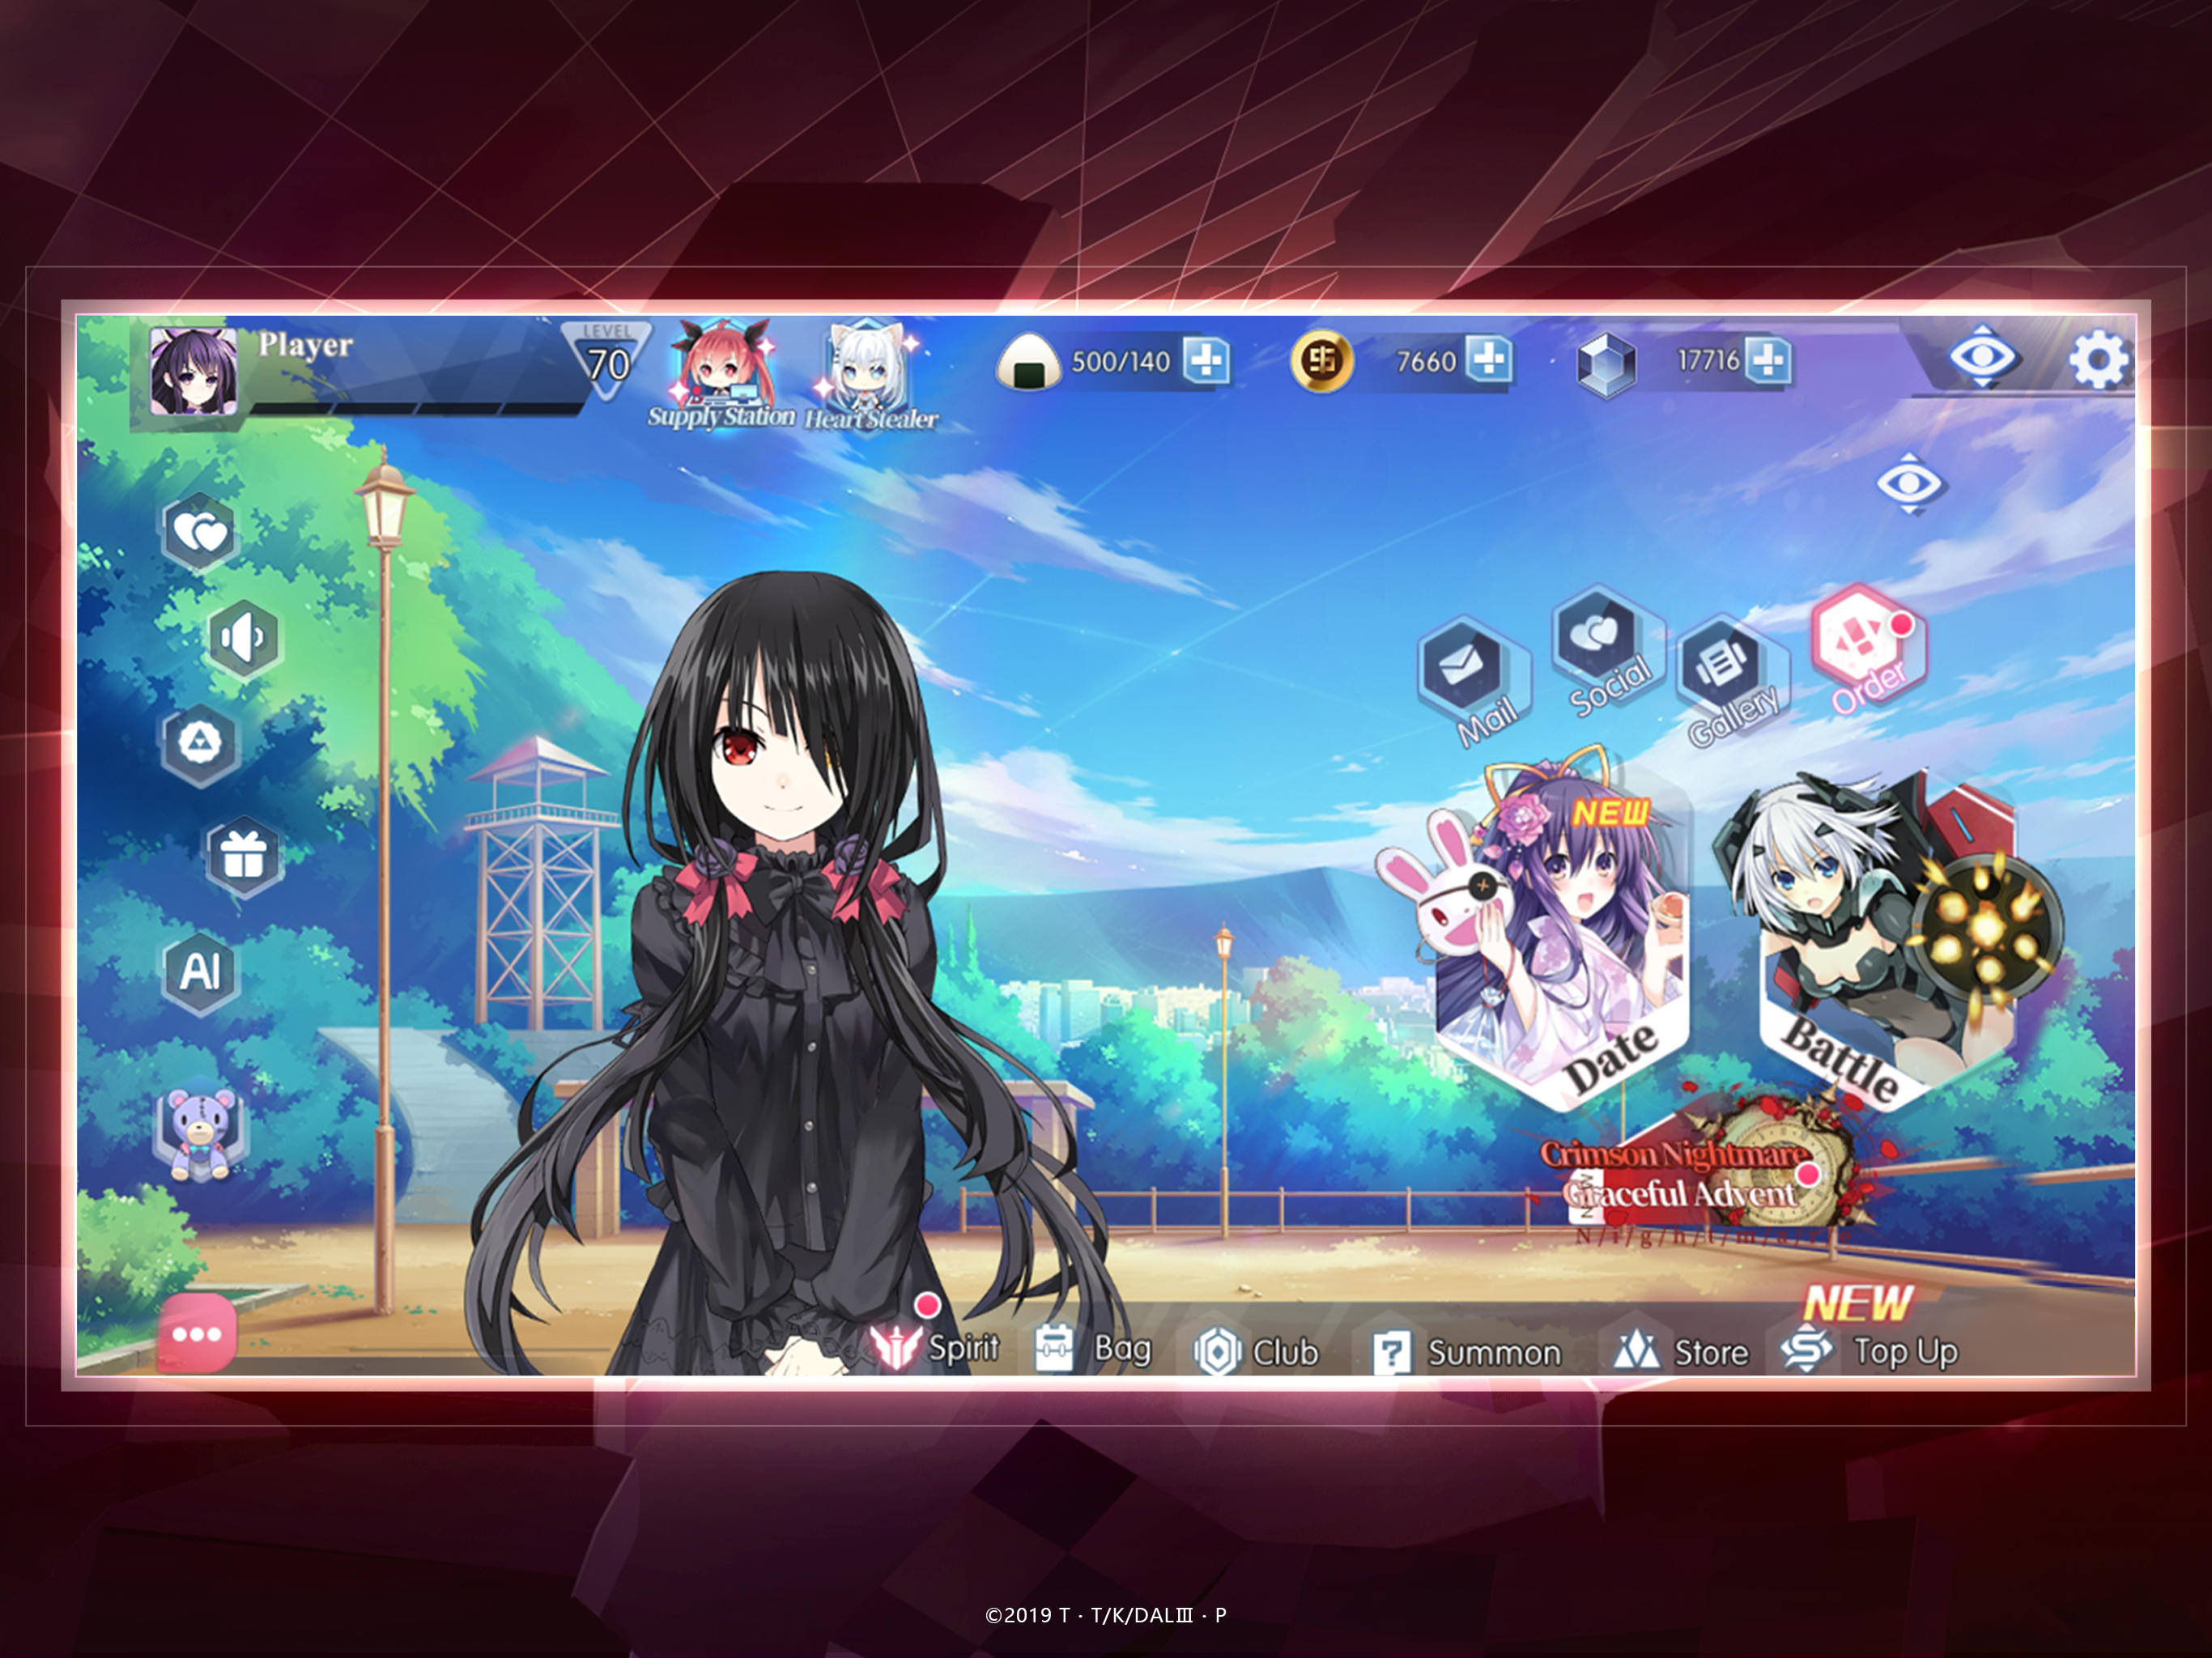 Date A Live: Spirit Pledge HD android iOS apk download for free-TapTap